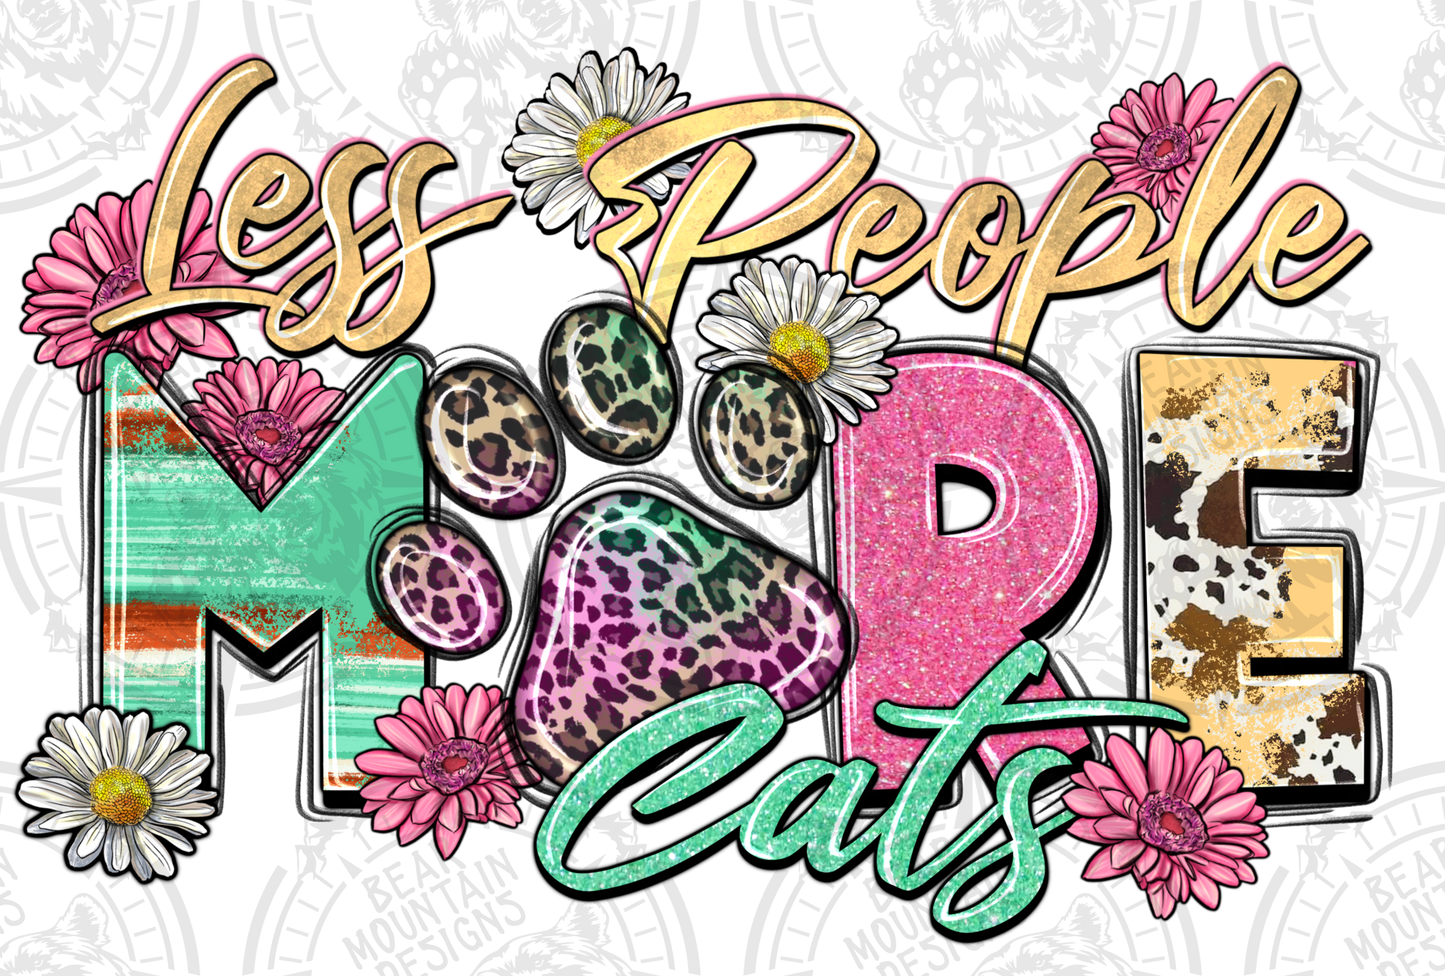 Less People More Cats 1